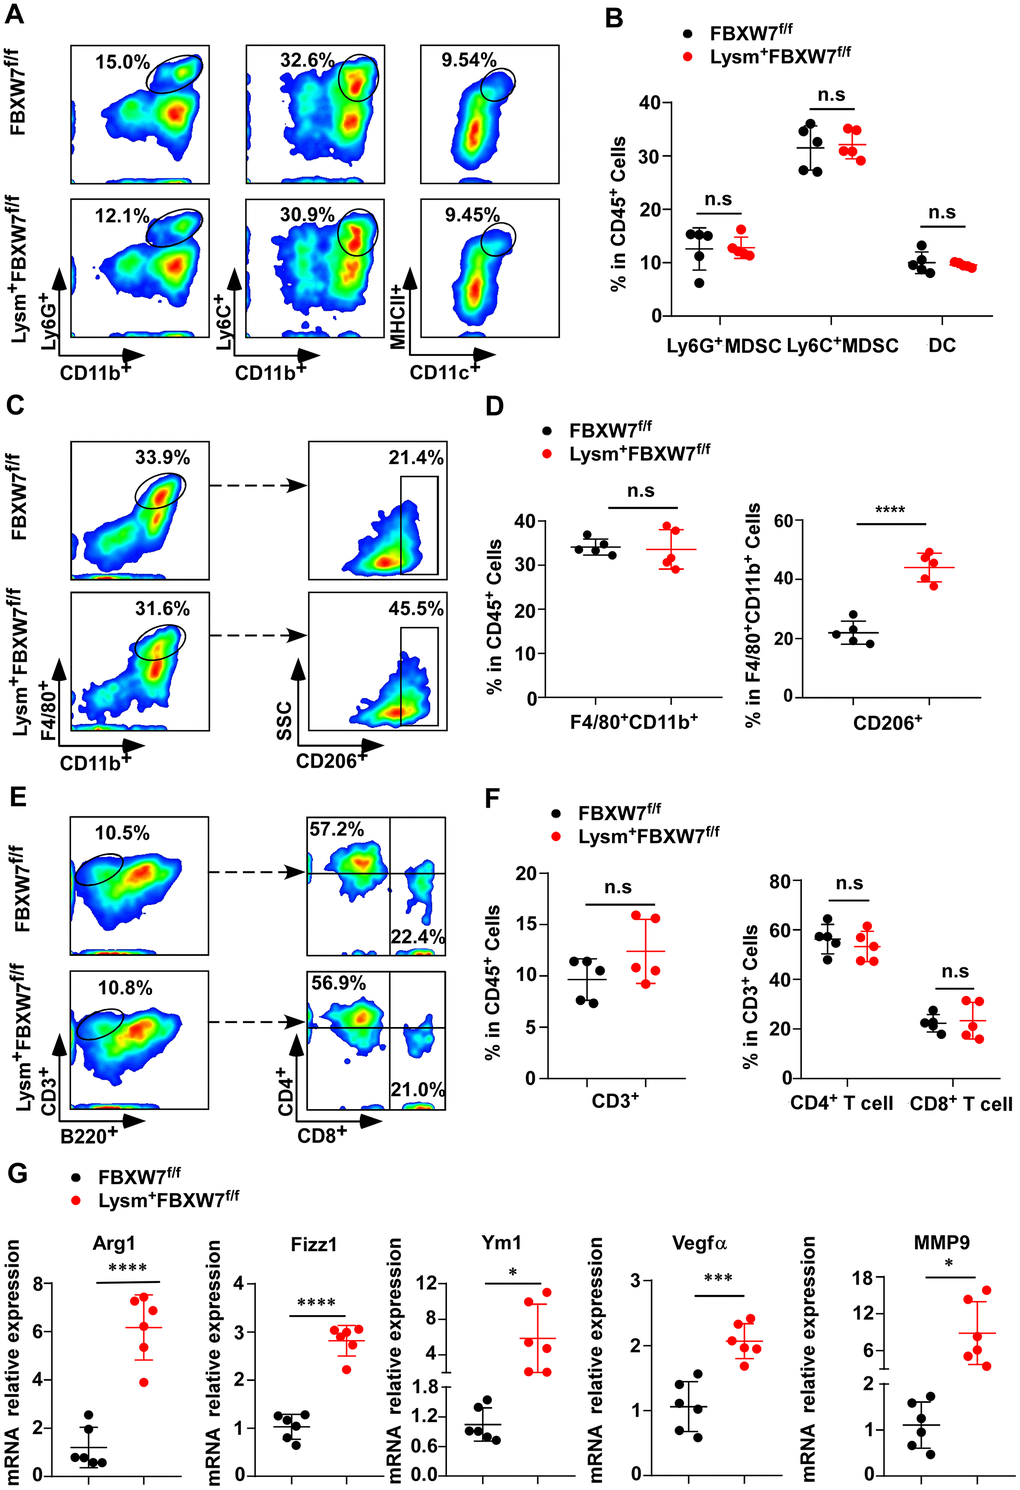 FBXW7 knockout in myeloid cells remodels the tumor immune microenvironment by promoting M2-like TAM polarization. (A) Tumors were digested to obtain single-cell suspensions. Ly6G+CD11b+ myeloid-derived suppressor cells (MDSCs), Ly6C+CD11b+ MDSCs, and MHCII+CD11c+ dendritic cells in the tumors were analyzed by flow cytometry. (B) Statistical analysis of the results in (A) (n = 5 per group). (C, D) Flow cytometry analysis (C) and statistical analysis (D) of F4/80+CD11b+ macrophages and CD206+ macrophages in tumors (n = 5 per group). (E, F) Flow cytometry analysis (E) and statistical analysis (F) of CD3+ T cells infiltrating the tumor, CD4+ and CD8+ T cells in CD3+ T cells (n = 5 per group). (G) Relative mRNA expression of Arg1, Fizz1, Ym1, VEGFα, and MMP9 in tumors was measured by qRT-PCR (n = 6 per group). Data are shown as the mean ± SD and are representative of three independent experiments. *P P P B, D, F, G)).